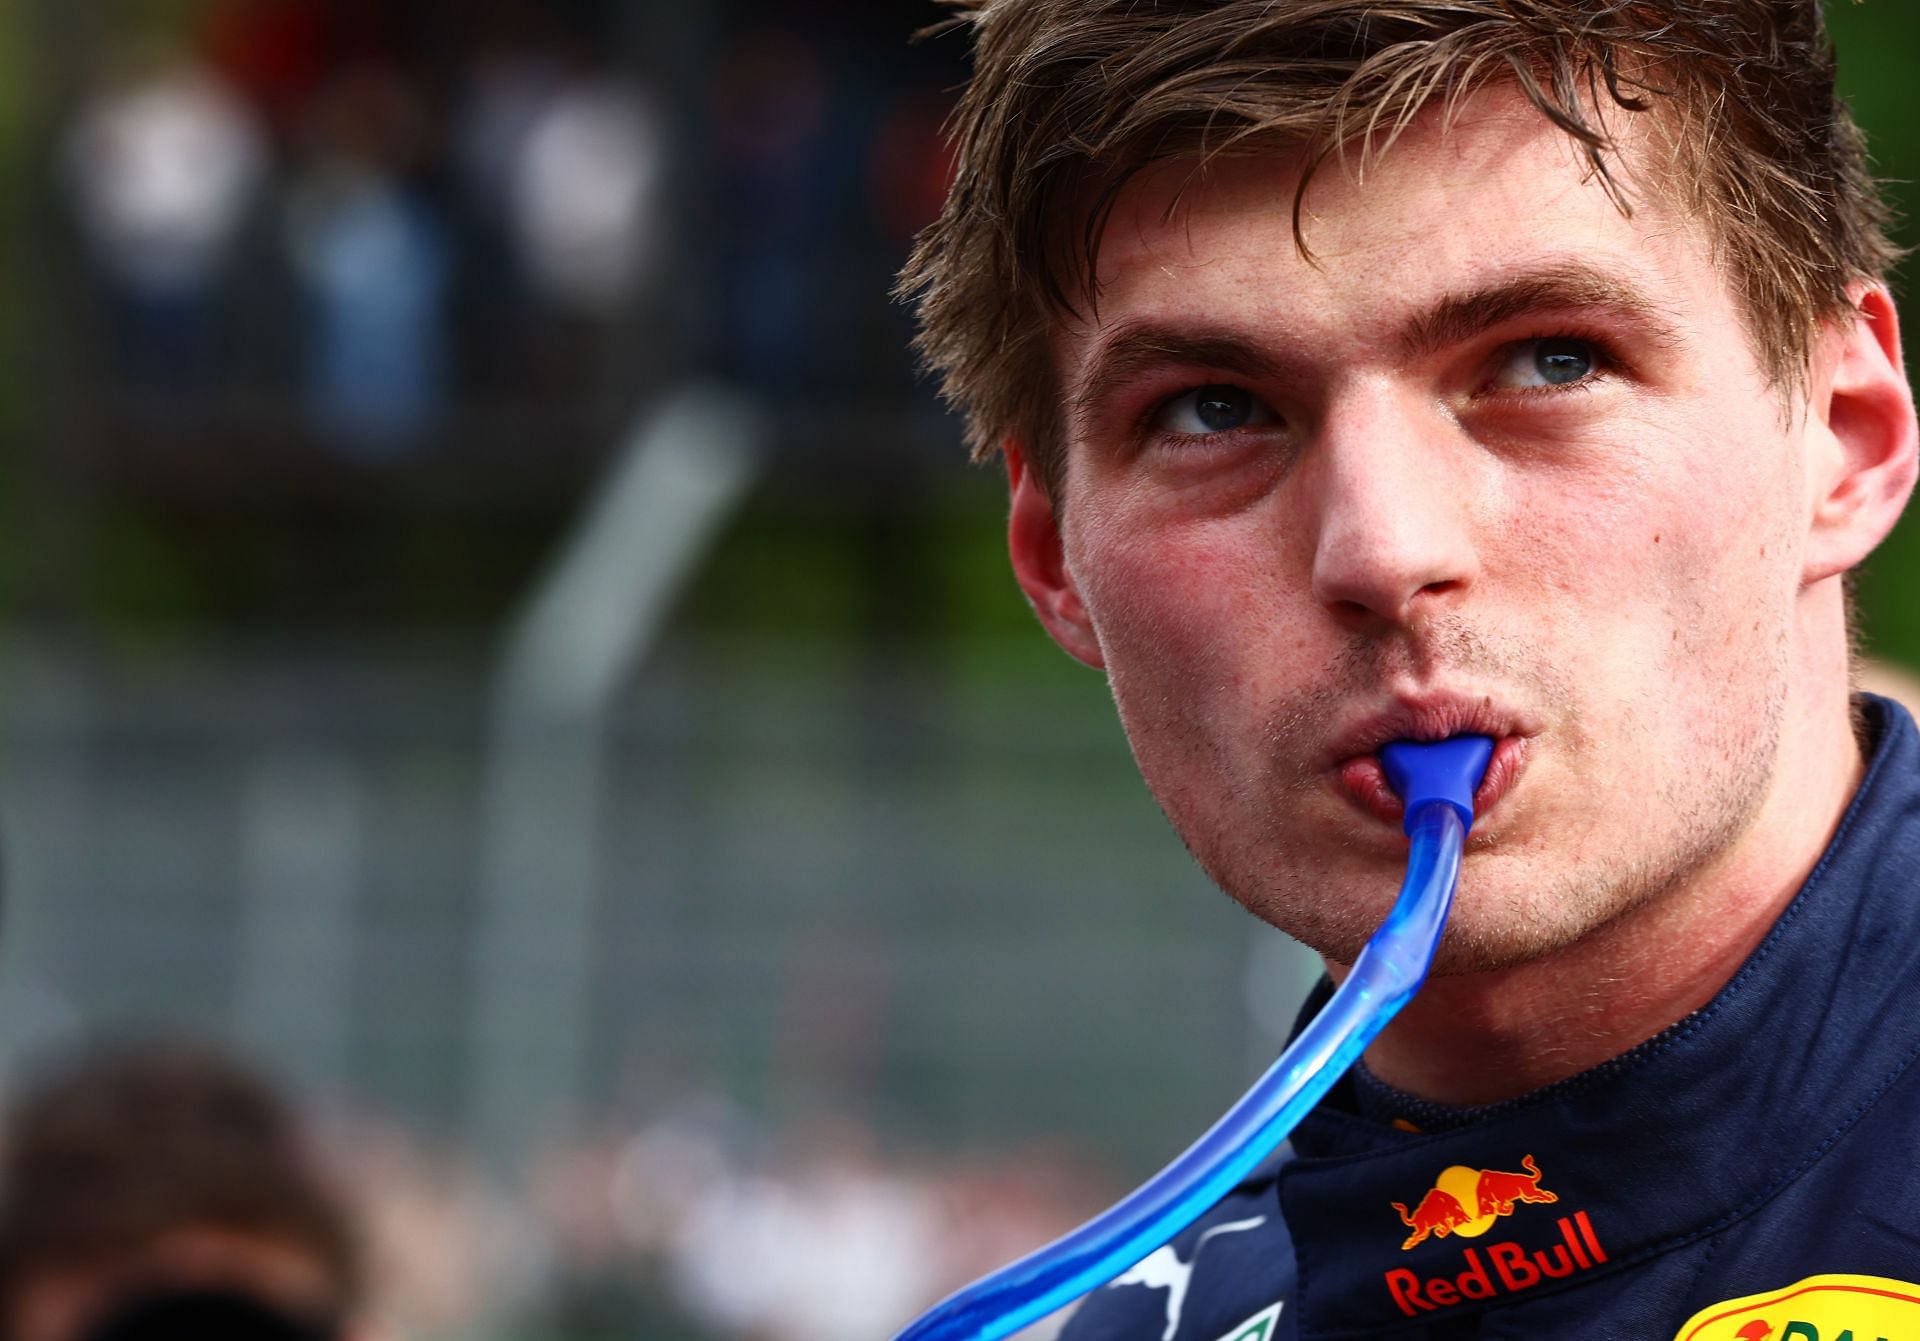 Why do F1 drivers drink from a long straw after a race?